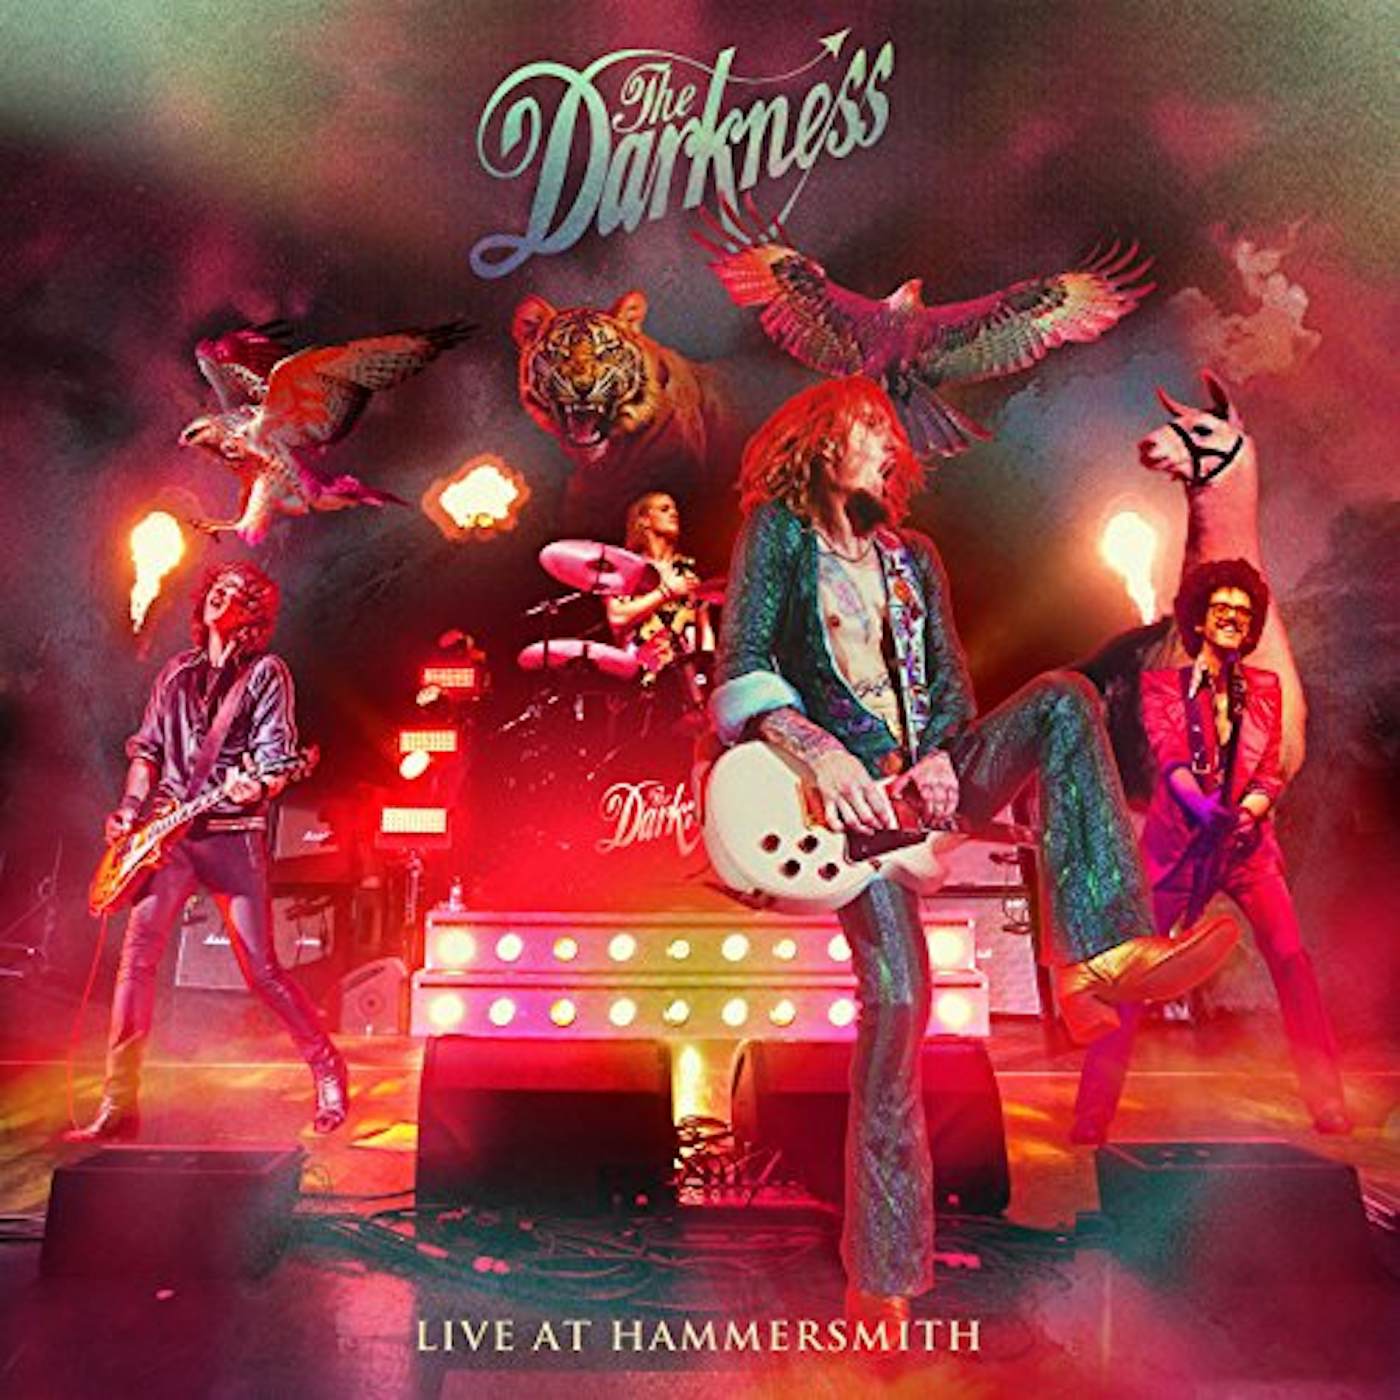 The Darkness Live at Hammersmith Vinyl Record